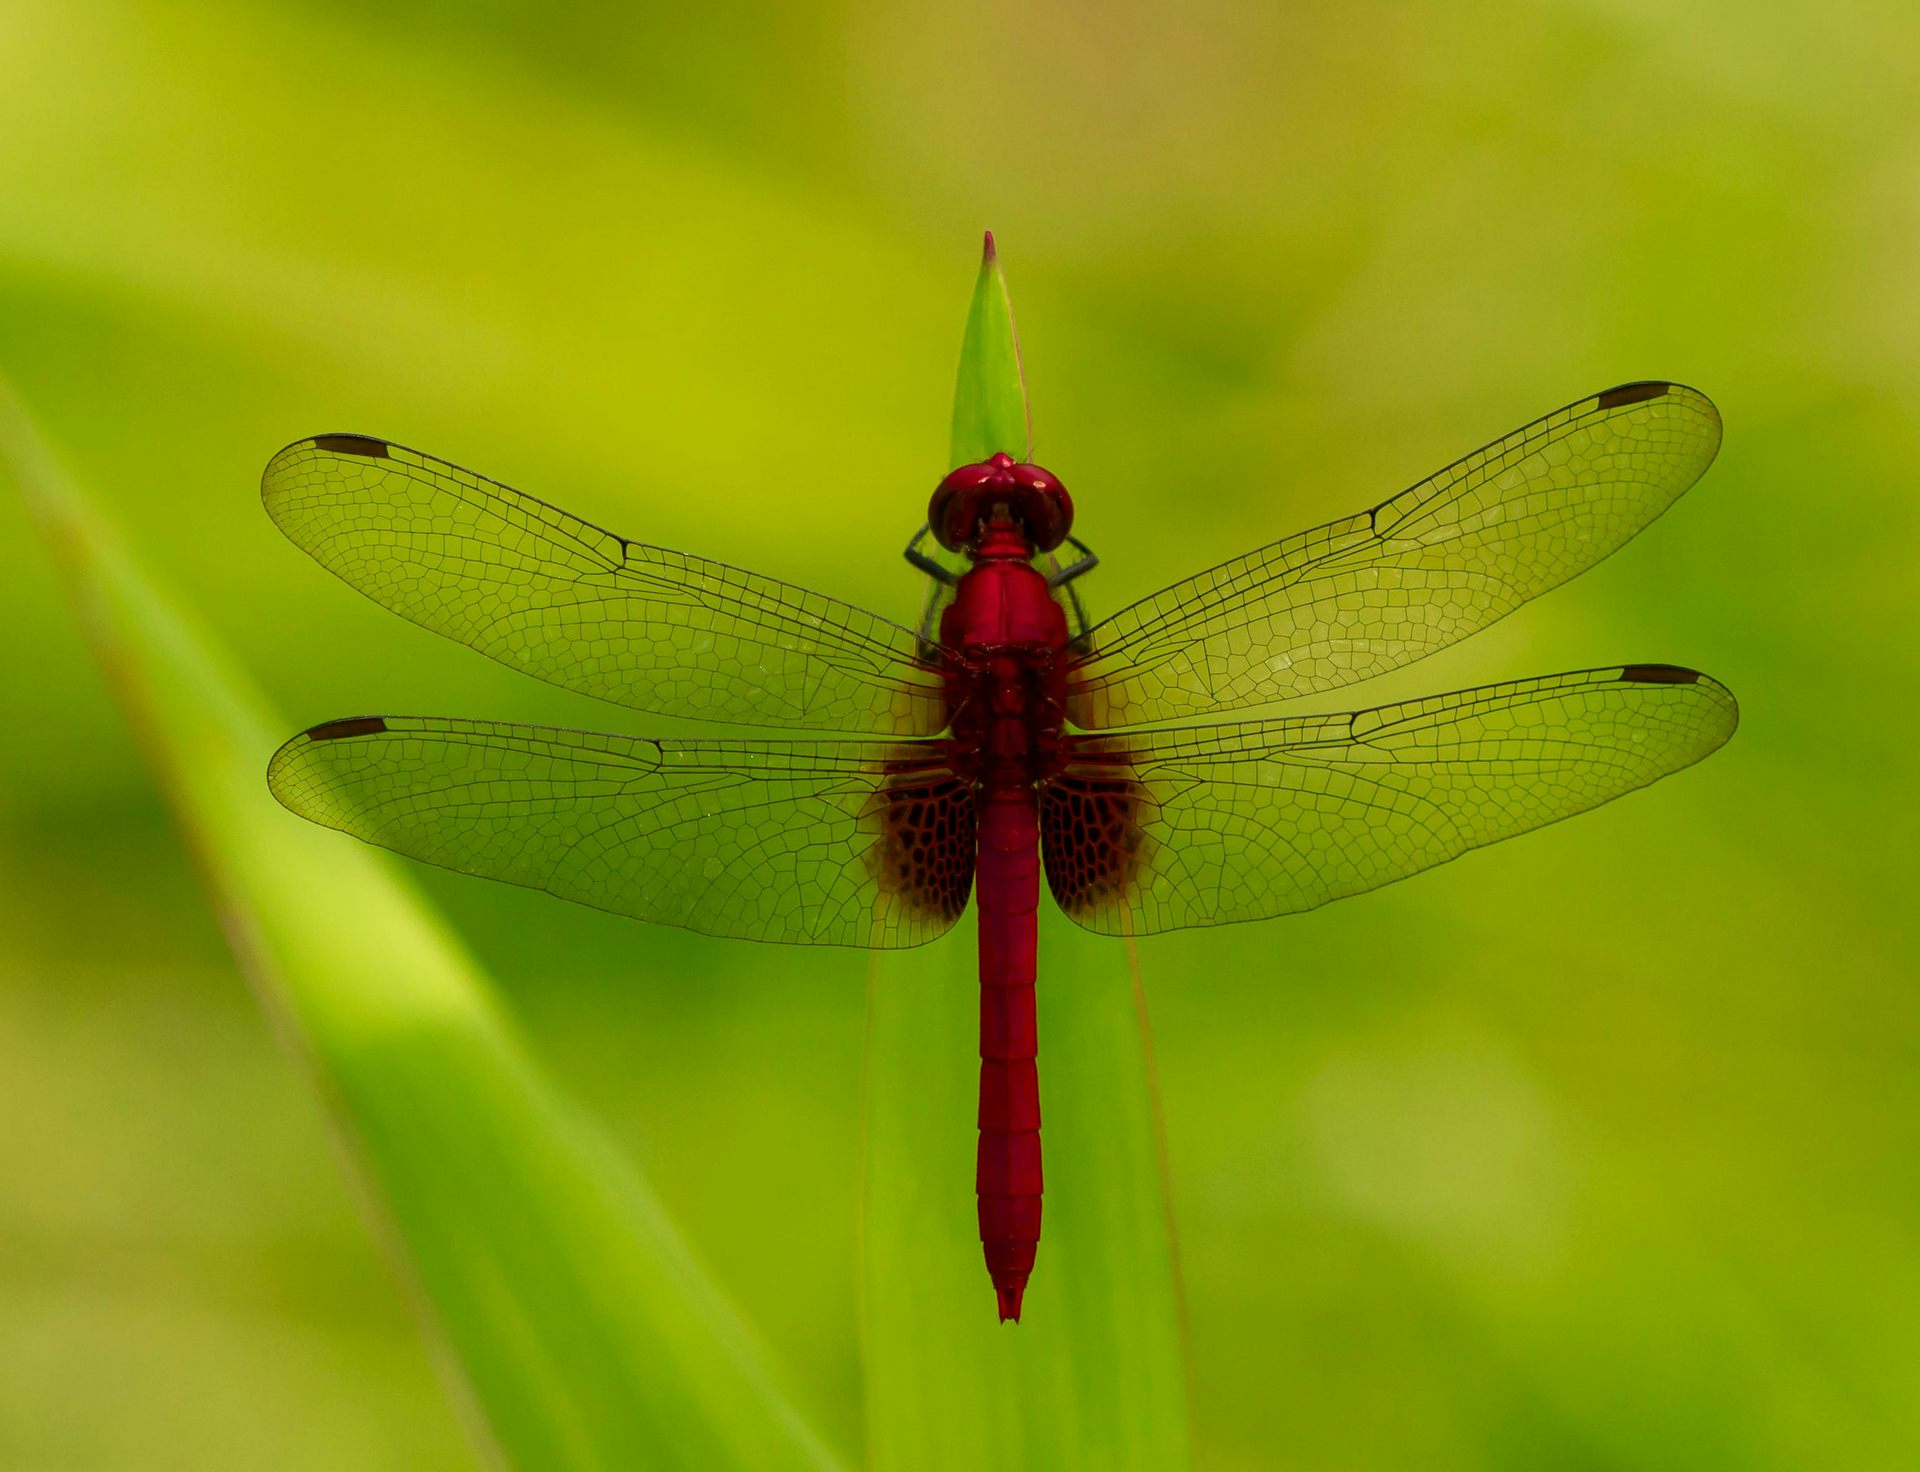 A red dragonfly resting on a plant frond.